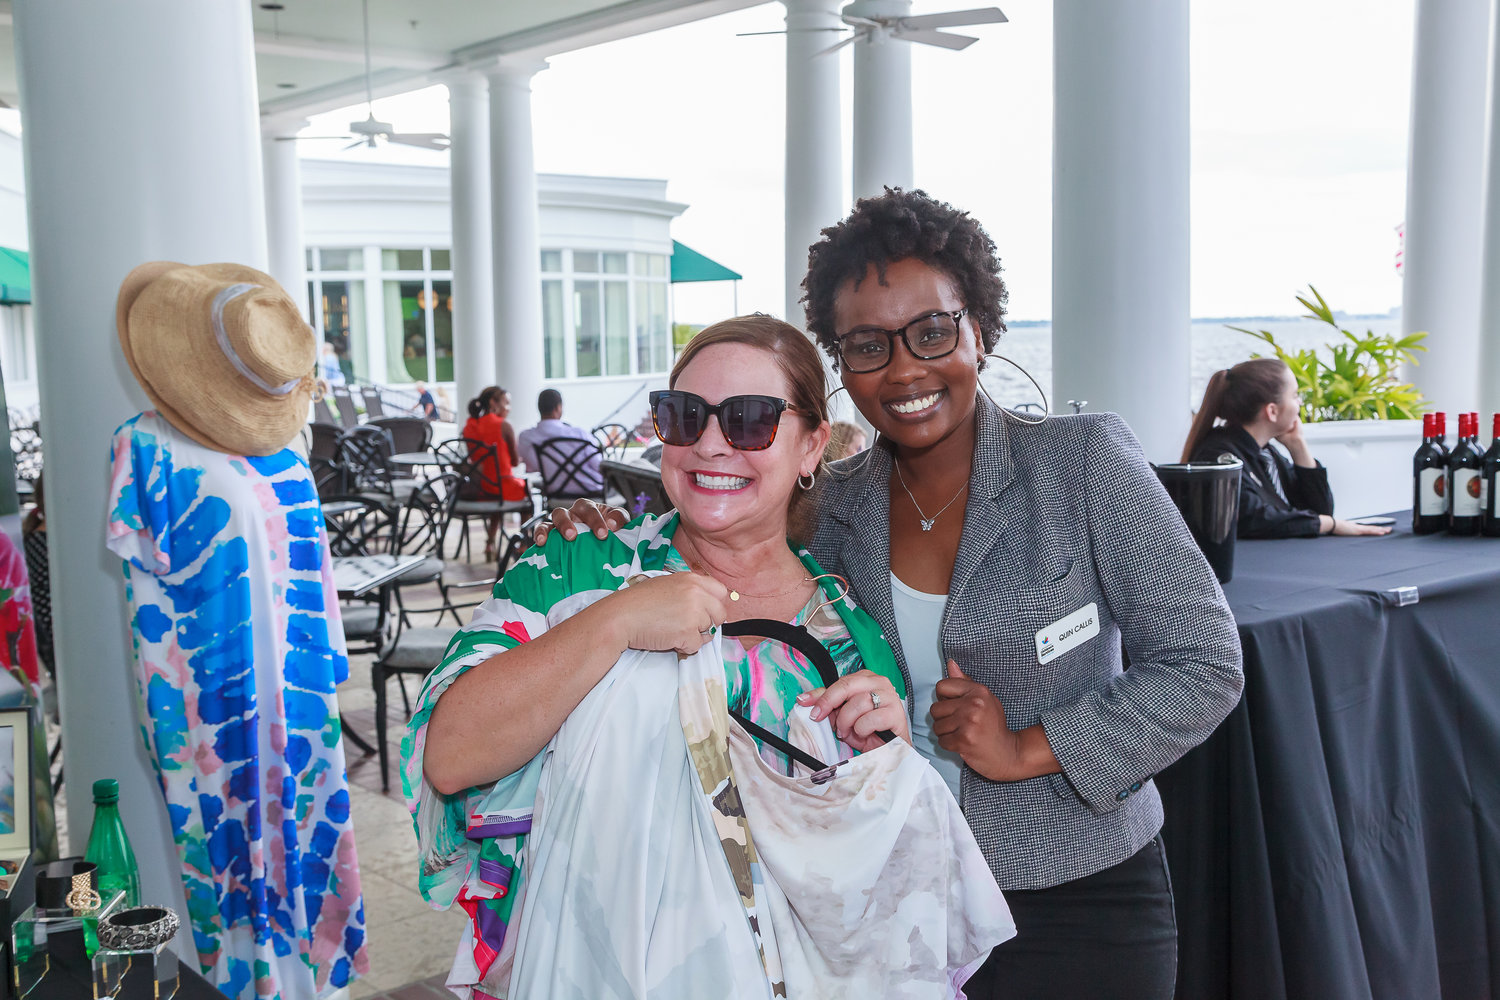 The Wine, Women & Shoes event was an evening of fun for attendees.